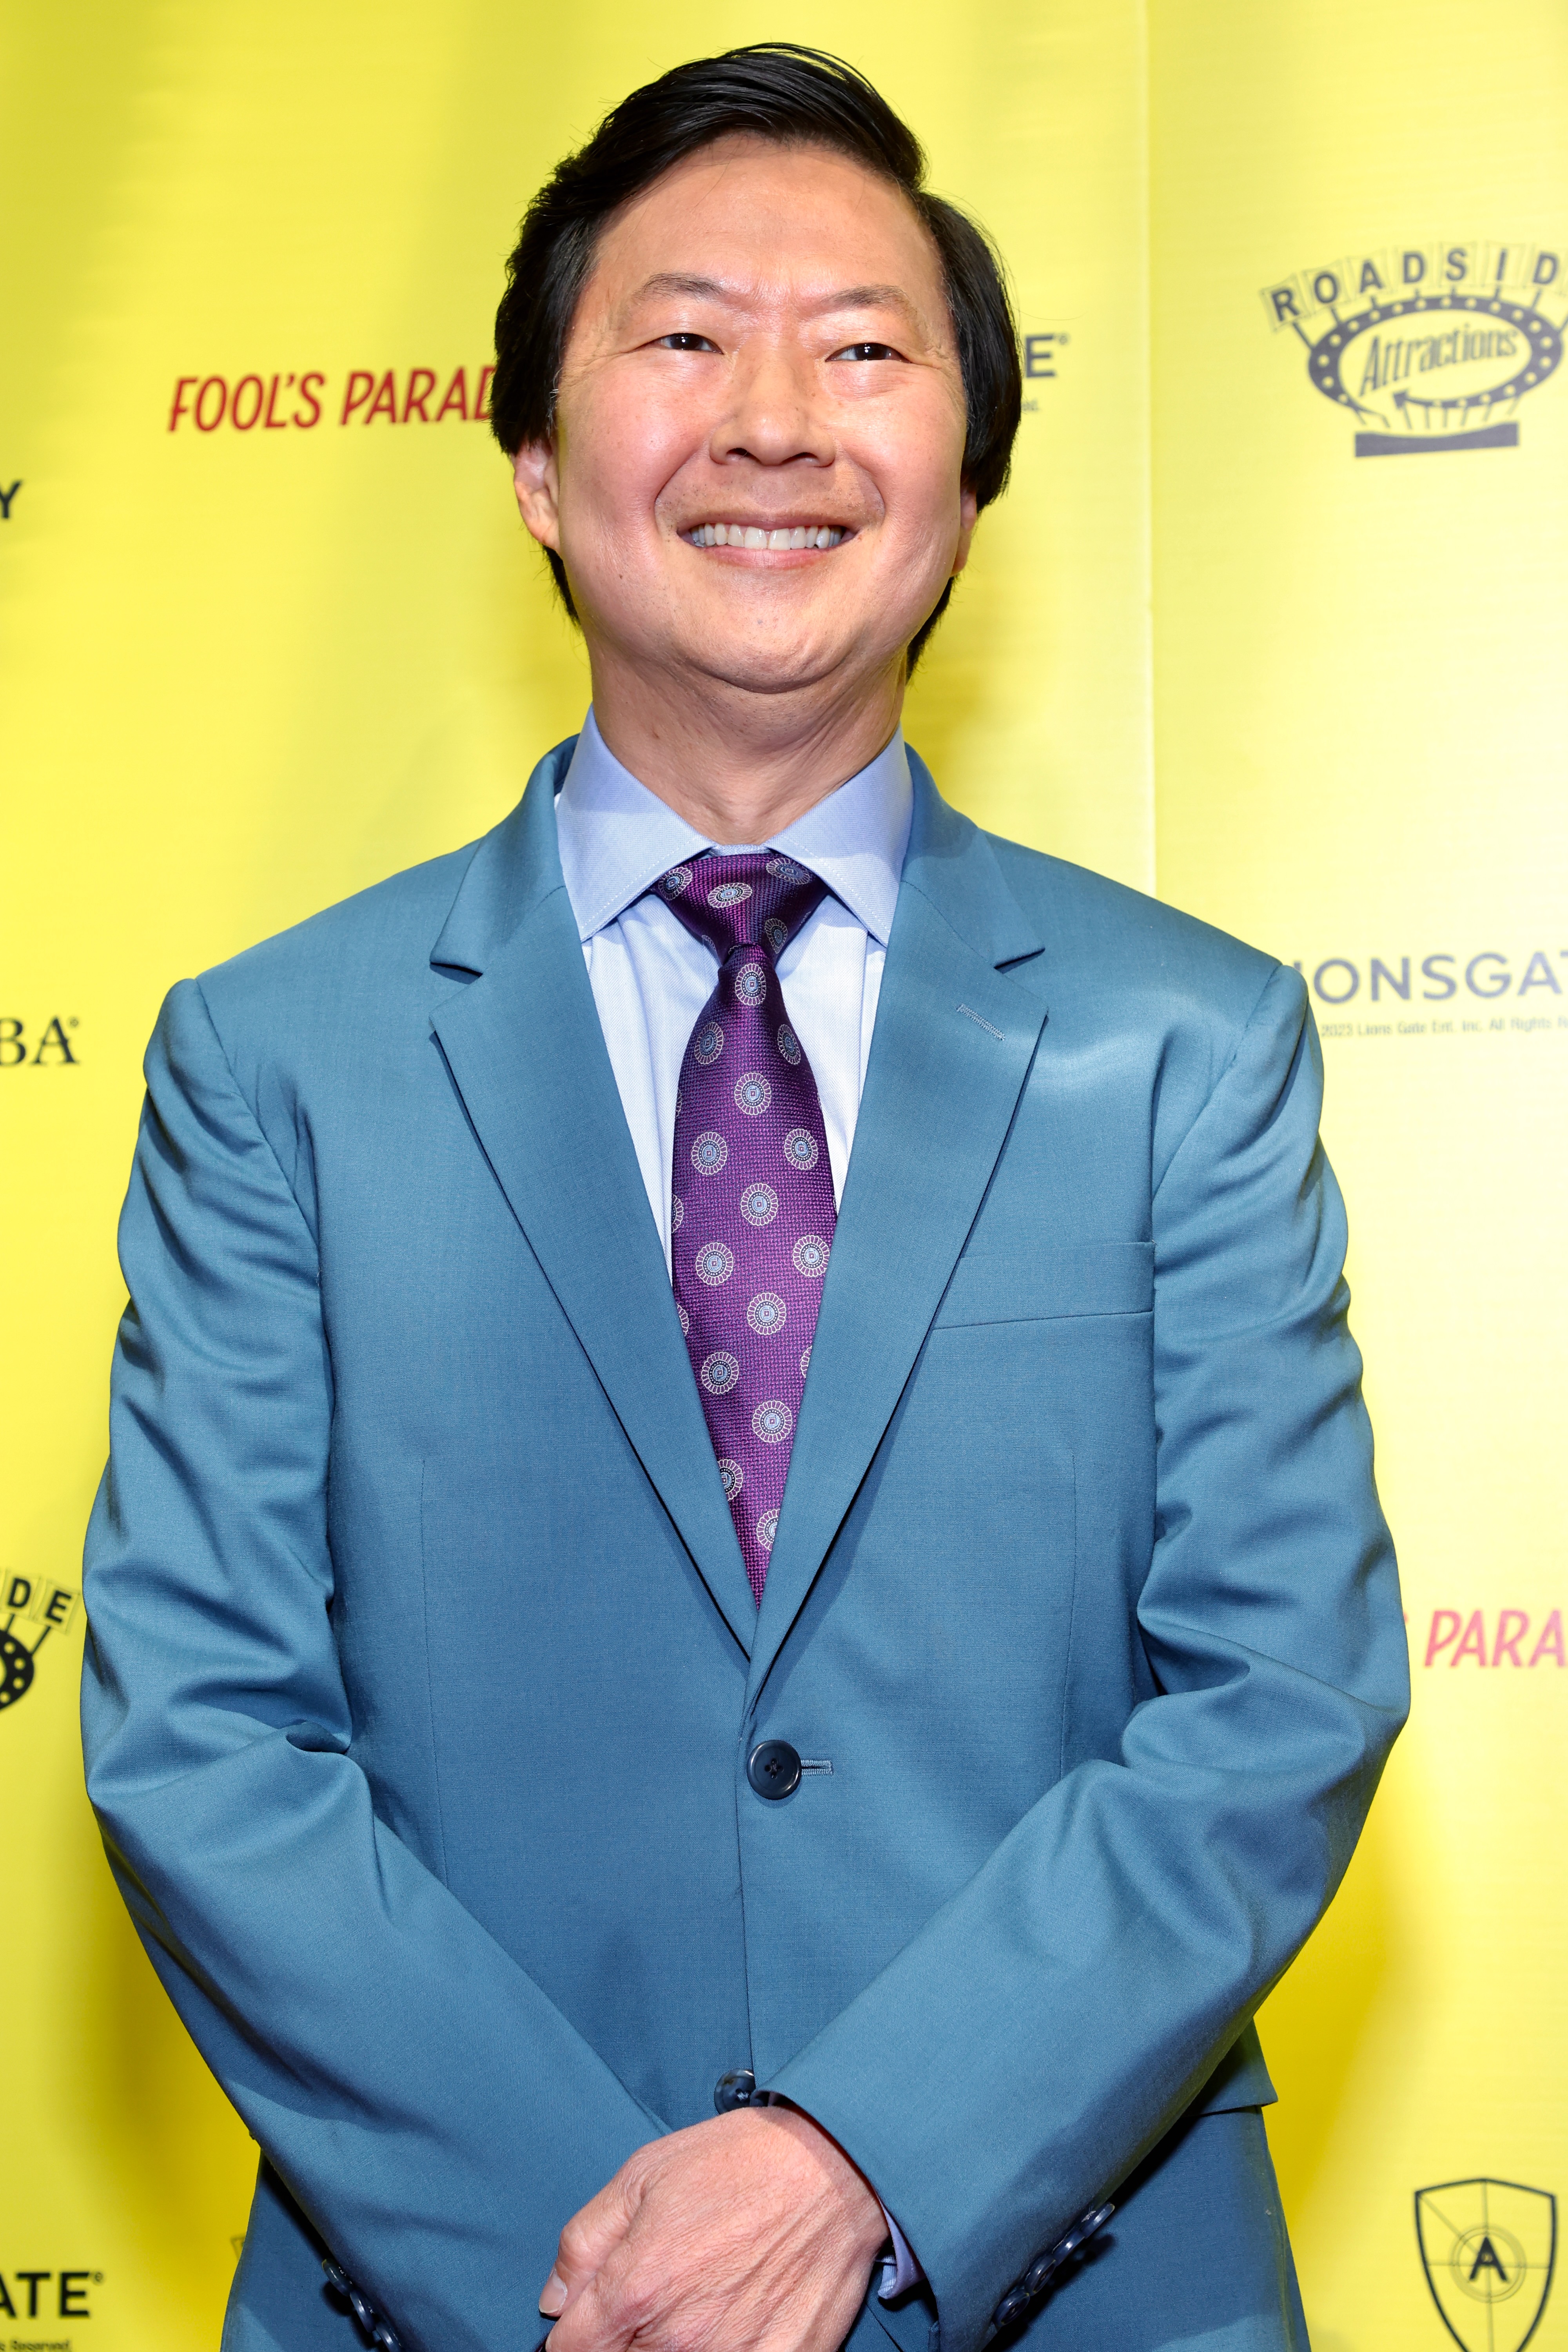 Ken Jeong attends the Los Angeles red carpet premiere of Roadside Attractions & Lionsgate's "Fool's Paradise" at TCL Multiplex on May 9, 2023, in Hollywood, California. | Source: Getty Images